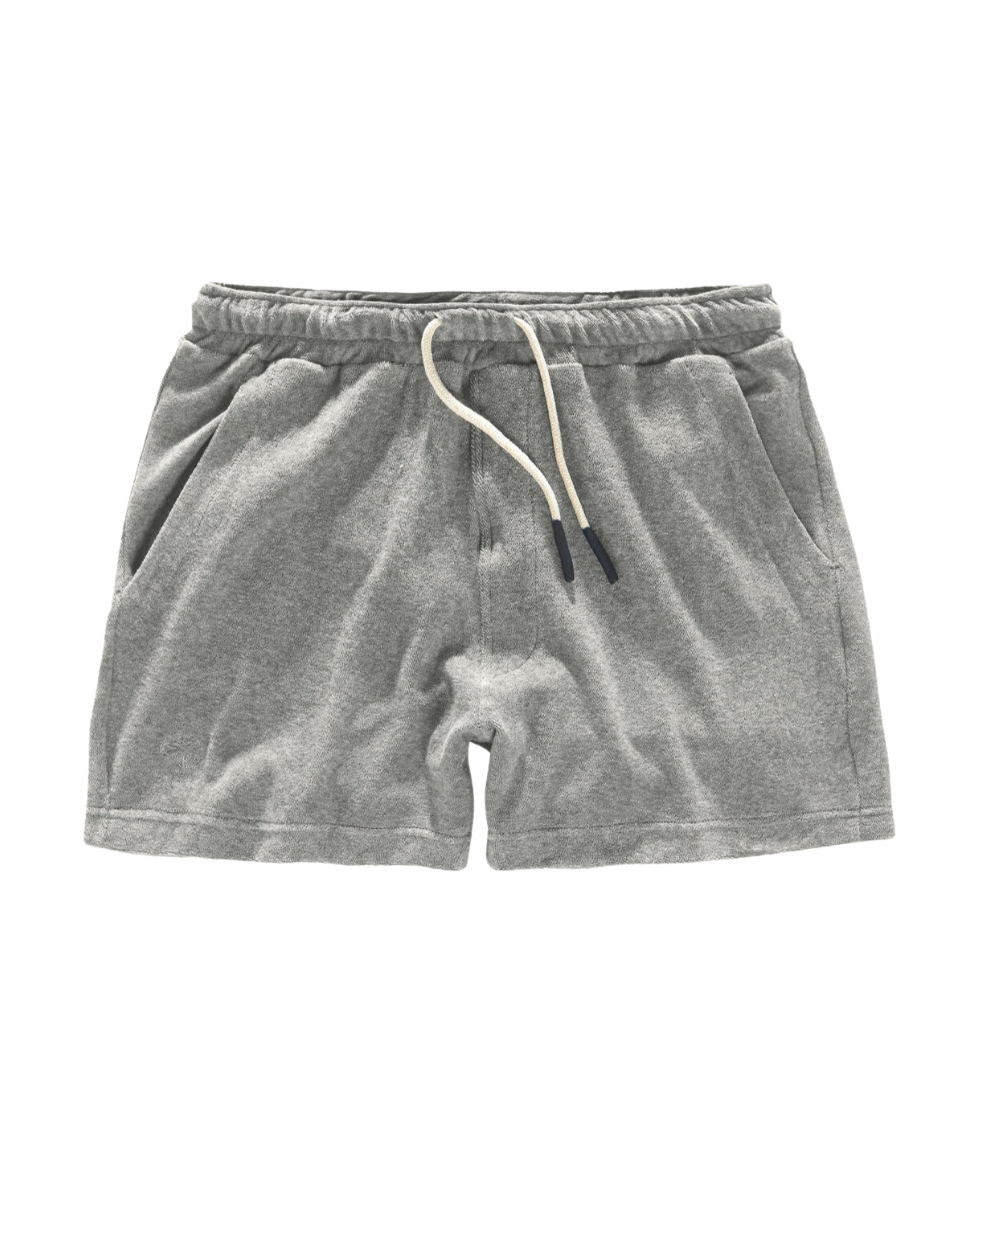 OAS Terry Shorts-Grey-50% OFF